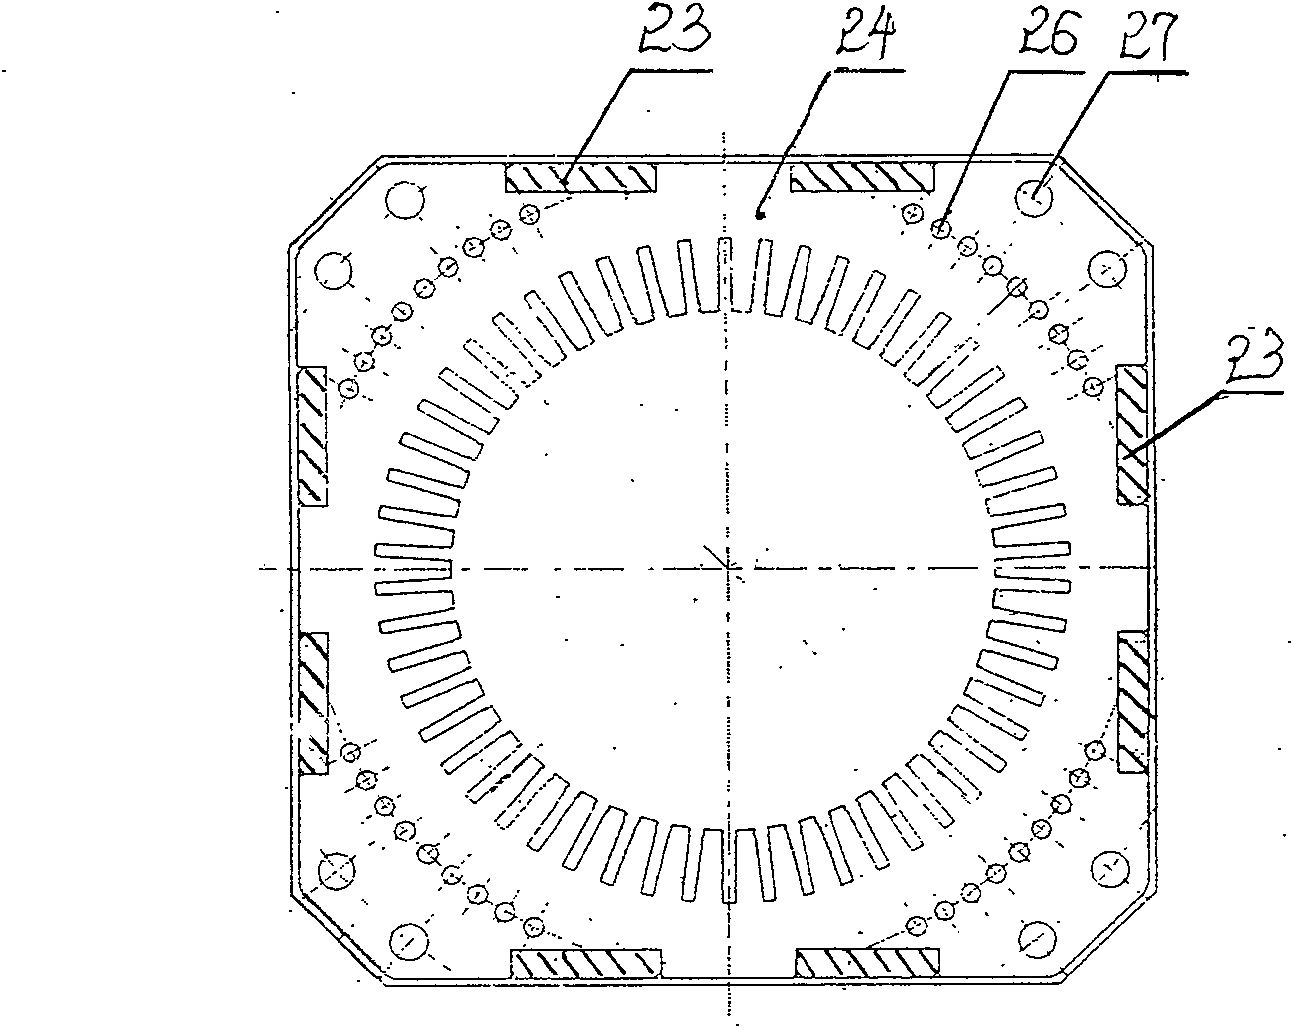 Vertical AC asynchronous topped driven motor